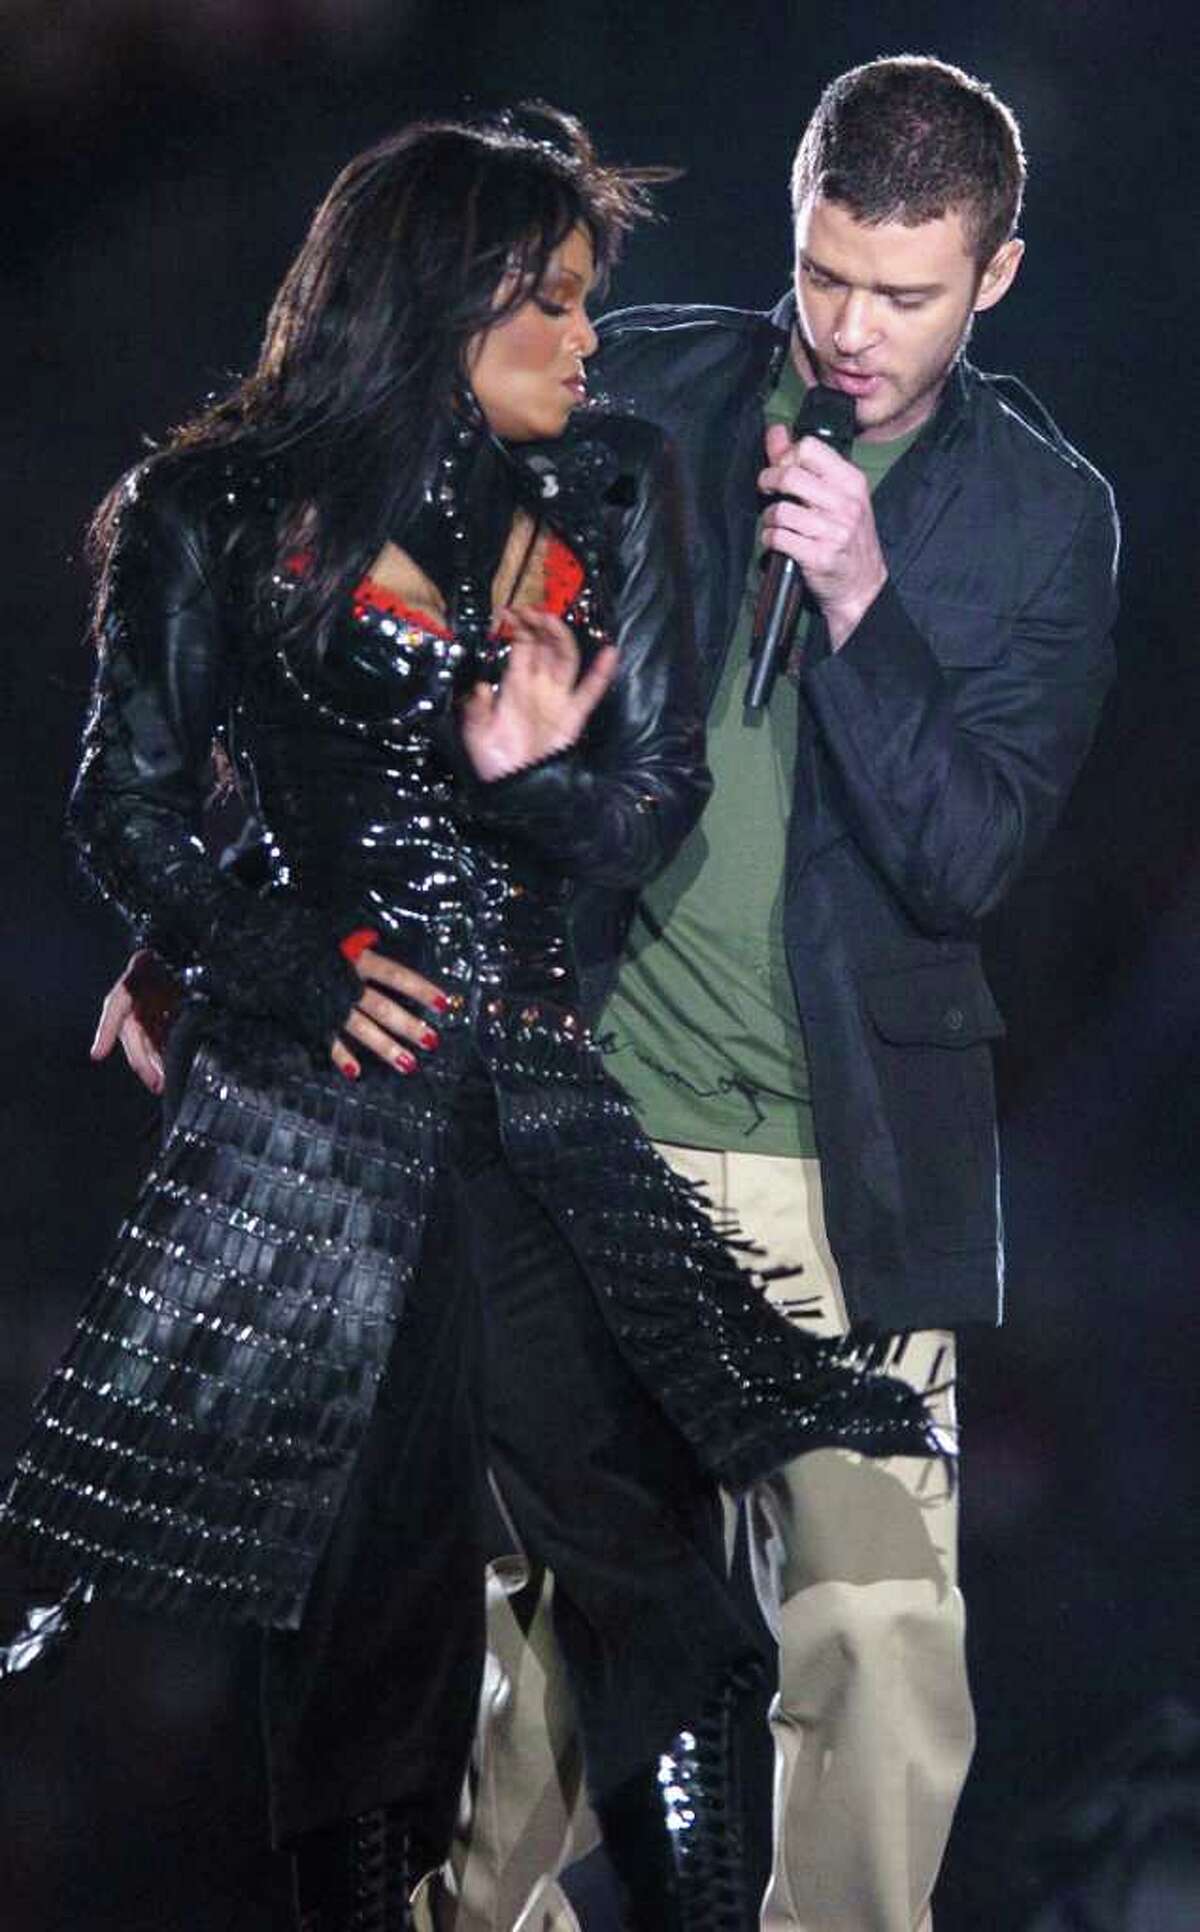 ASSOCIATED PRESS FILE PHOTO 2004 INCIDENT: Justin Timberlake and Janet Jackson are seen during their Super Bowl XXXVIII performance prior to a "wardrobe malfunction" during the halftime performance.